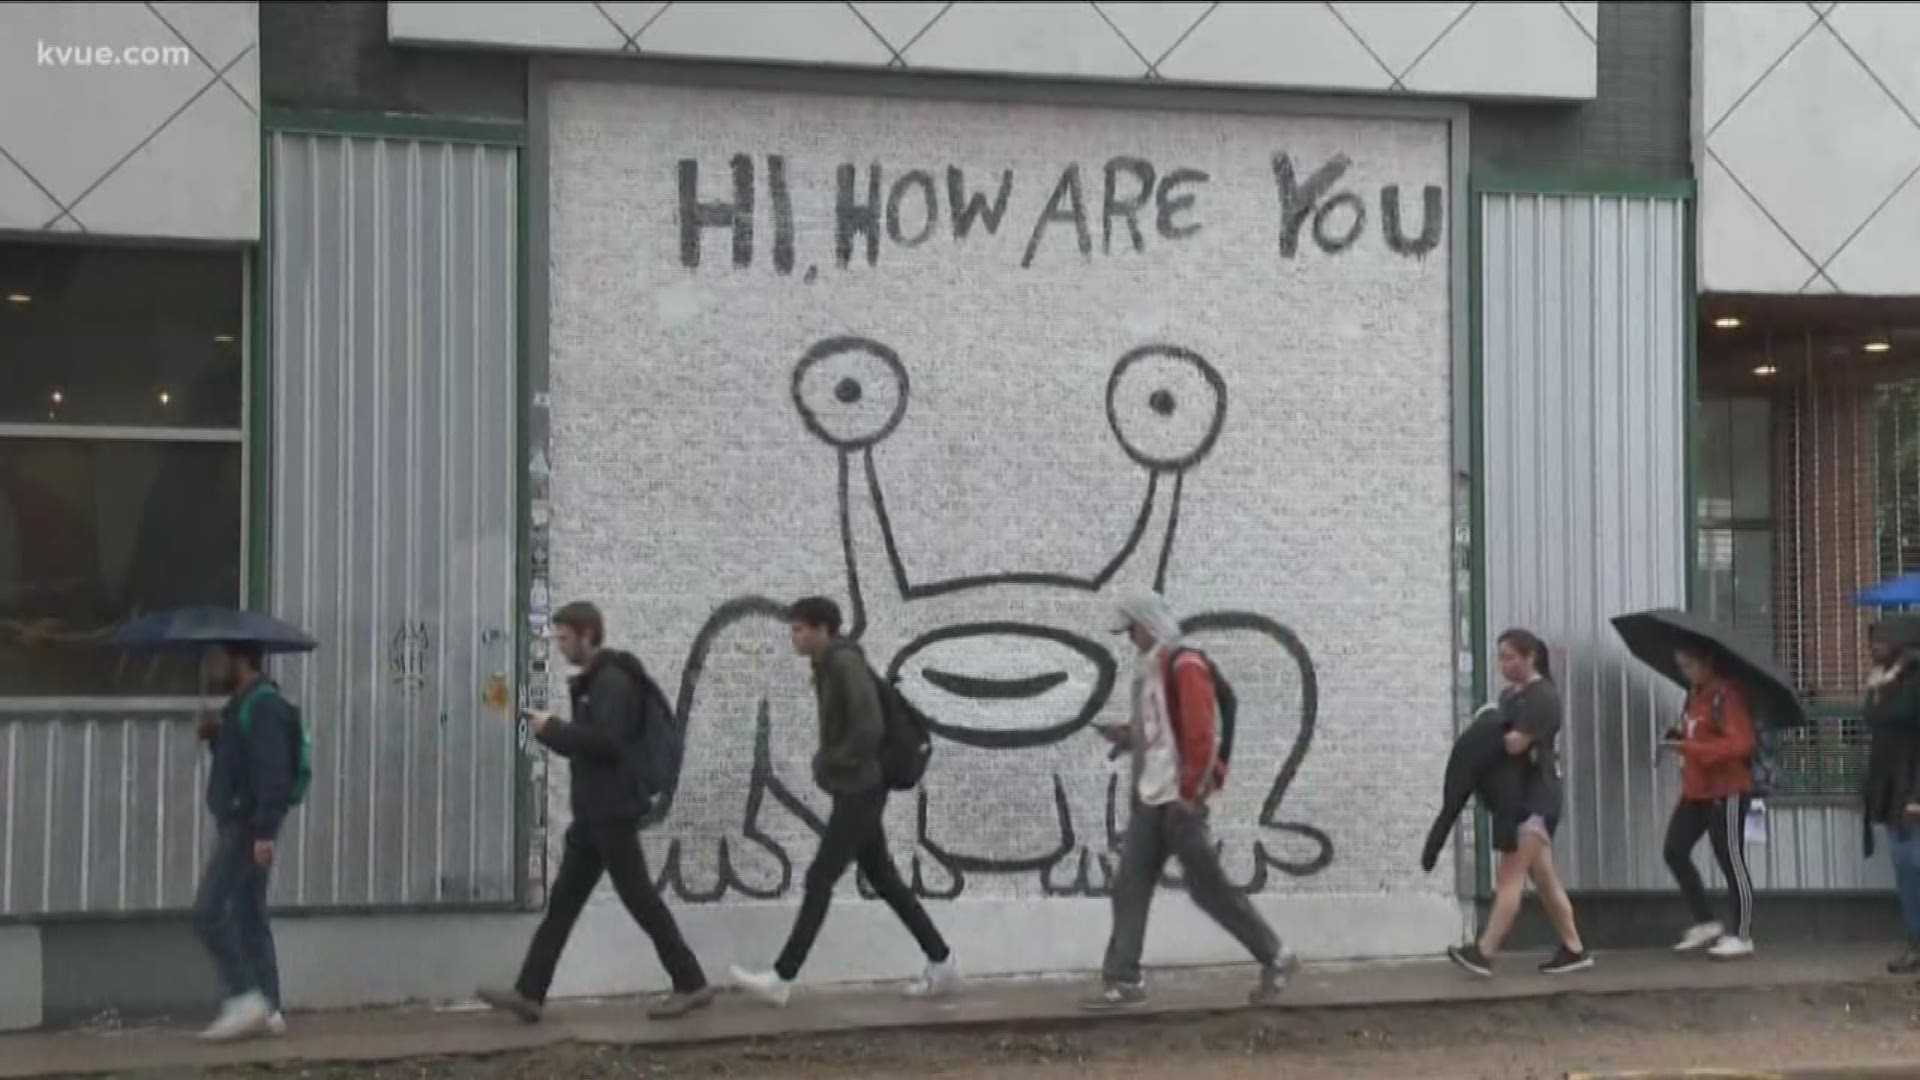 It's a day inspired by artist and musician Daniel Johnston, the man behind Austin's "Hi, How Are You?" mural.